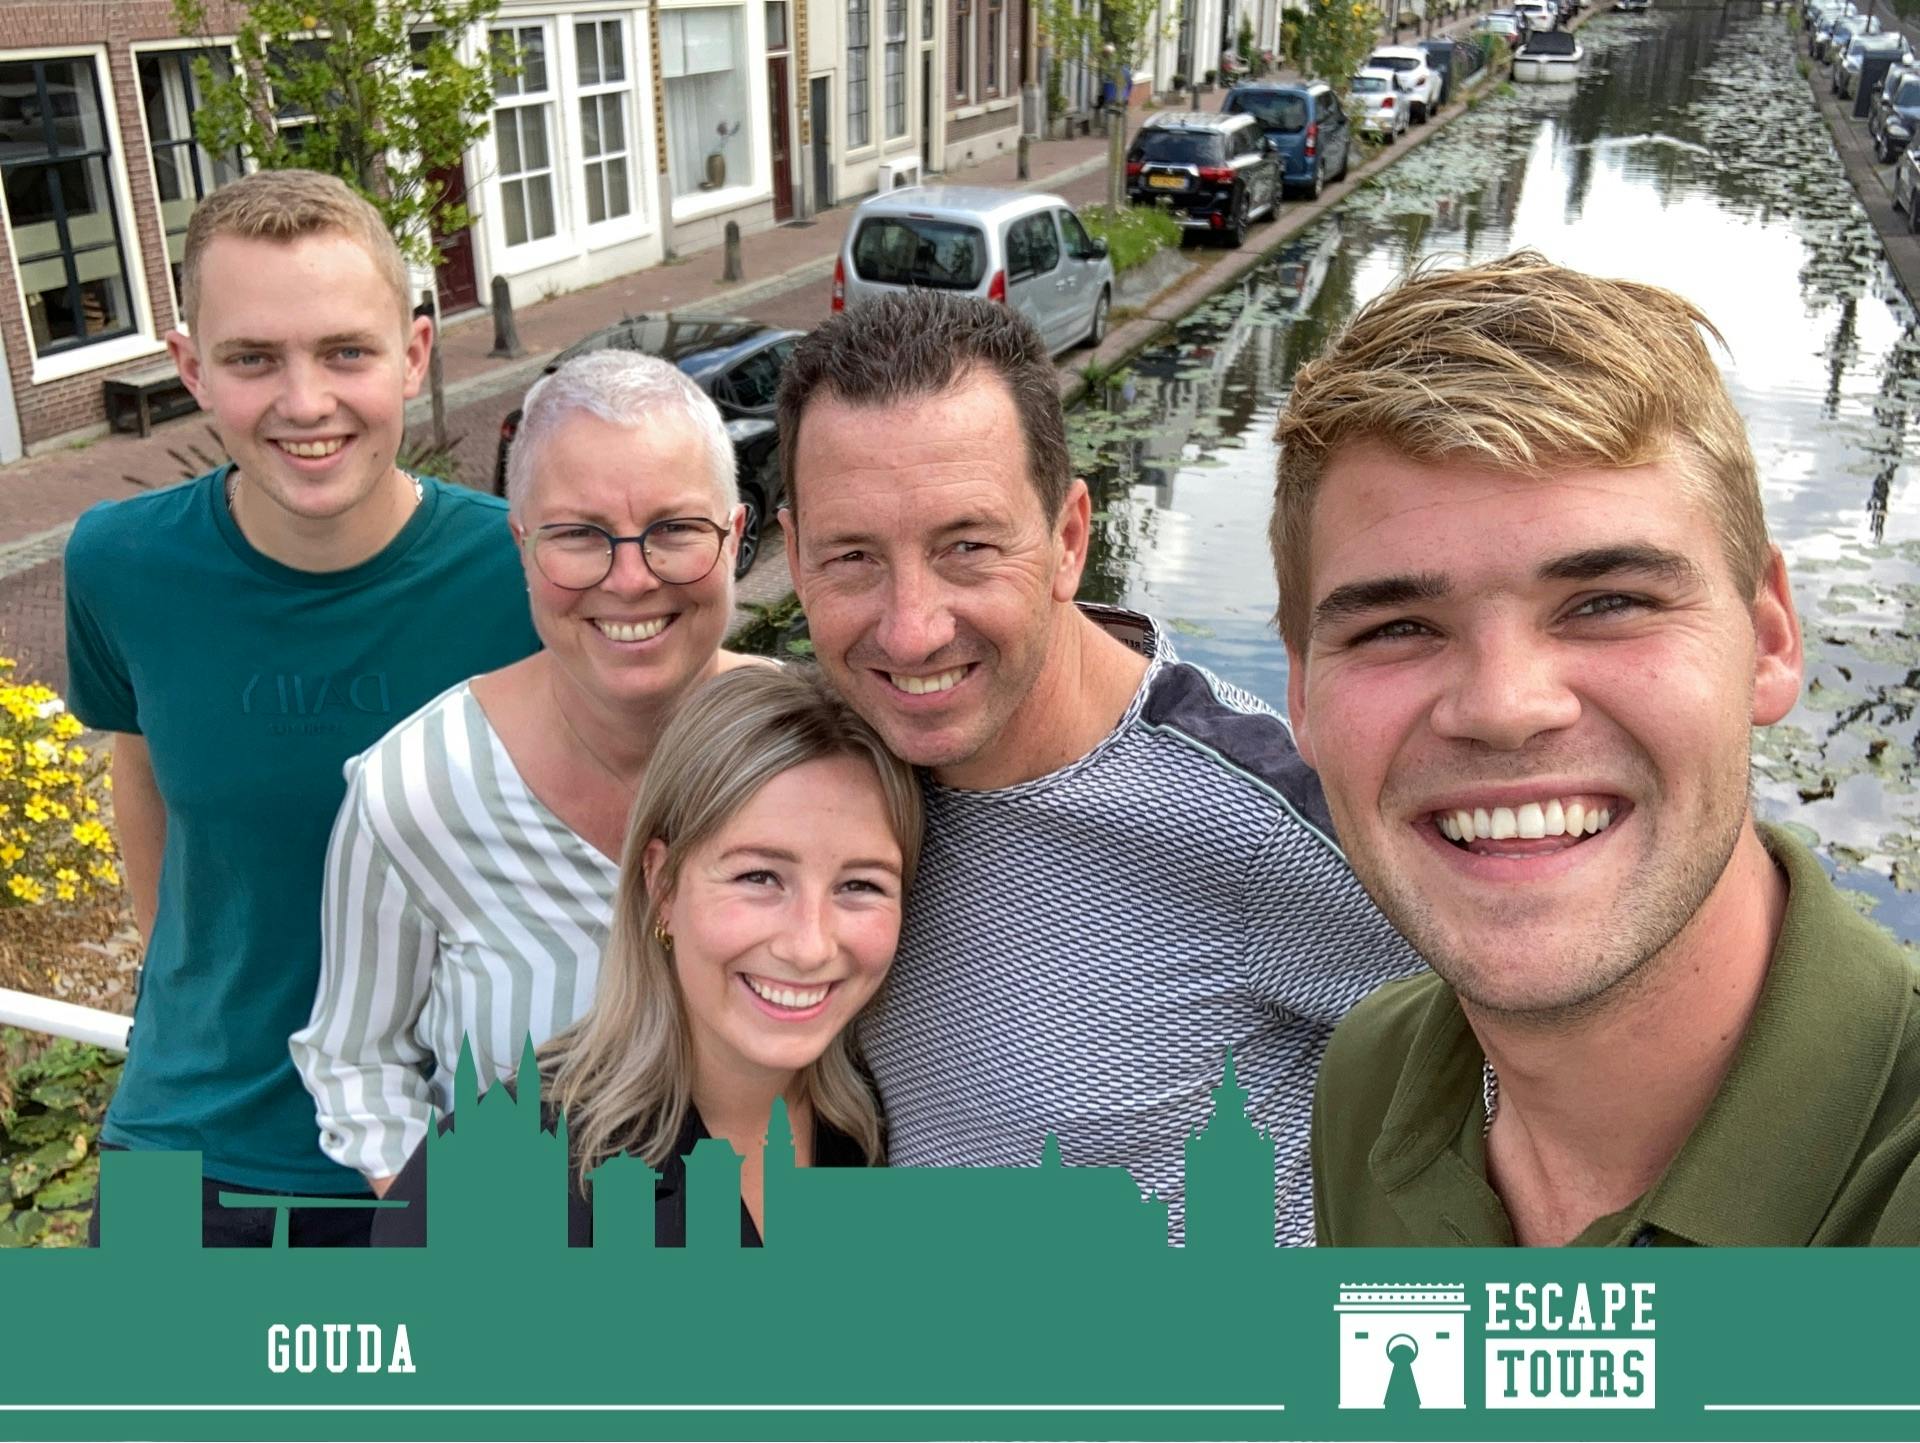 Escape Tour self-guided, interactive city challenge in Gouda